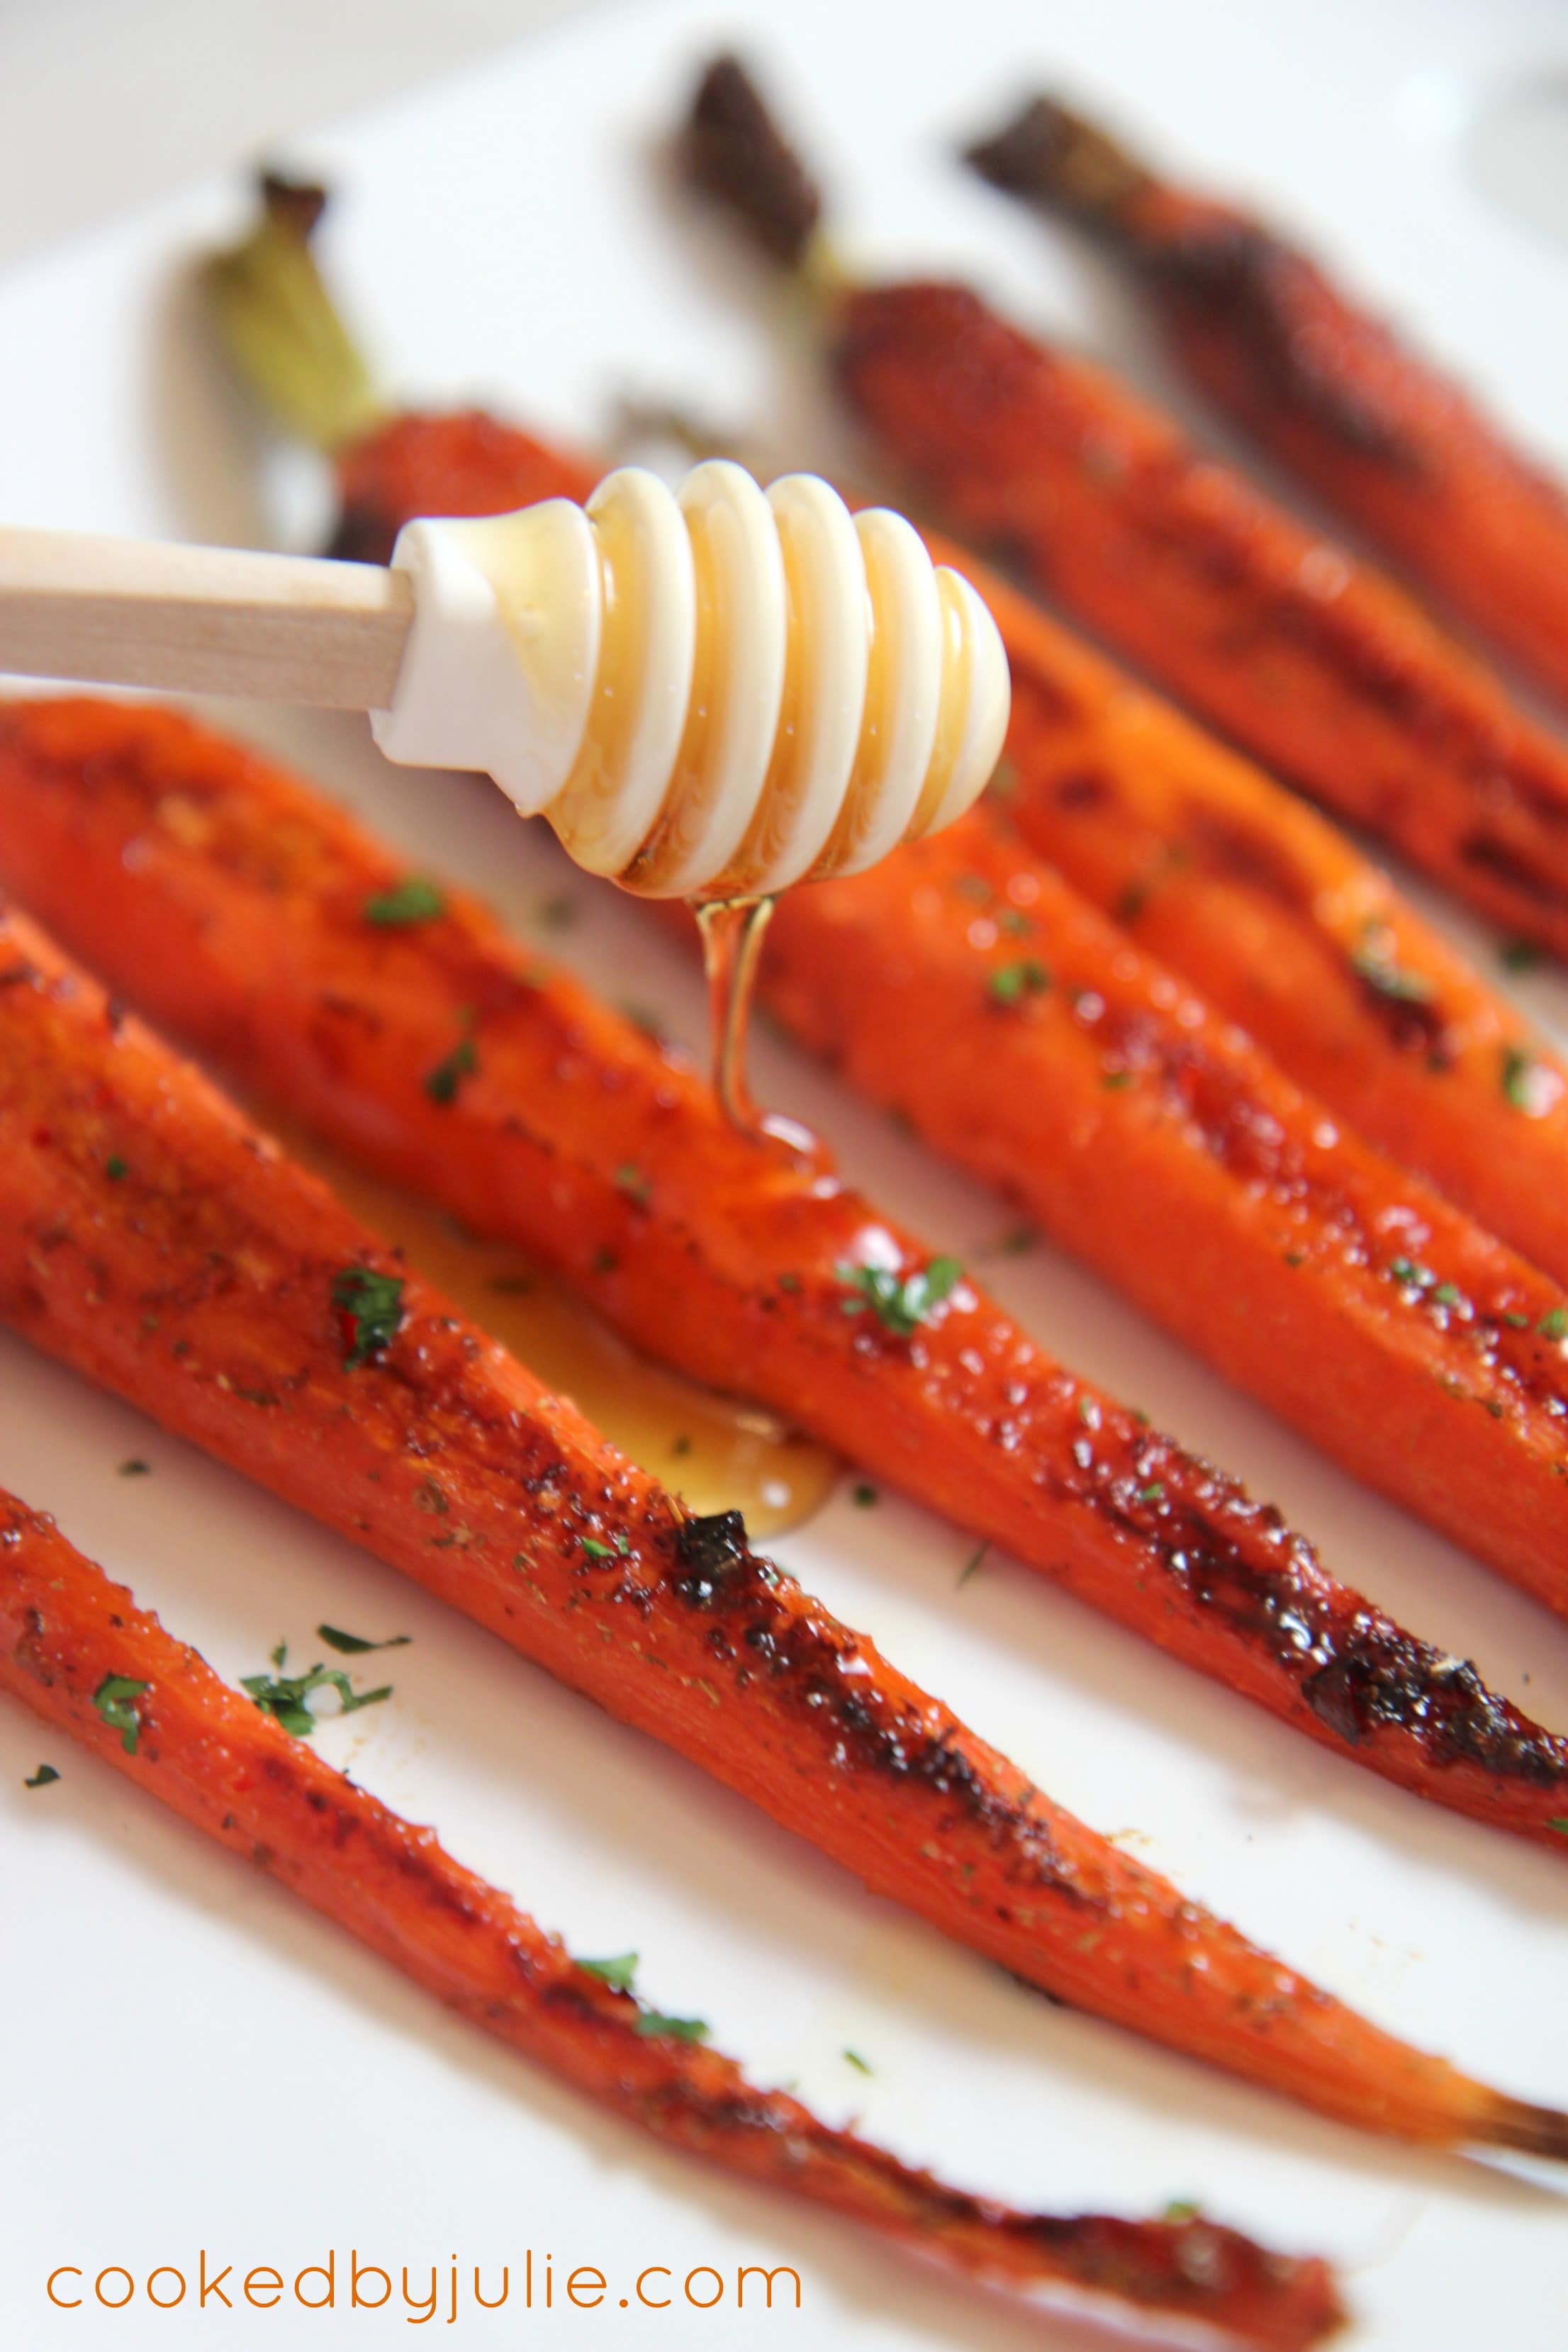 honey glazed garlic roasted carrots make a simple holiday side dish that's ready in minutes